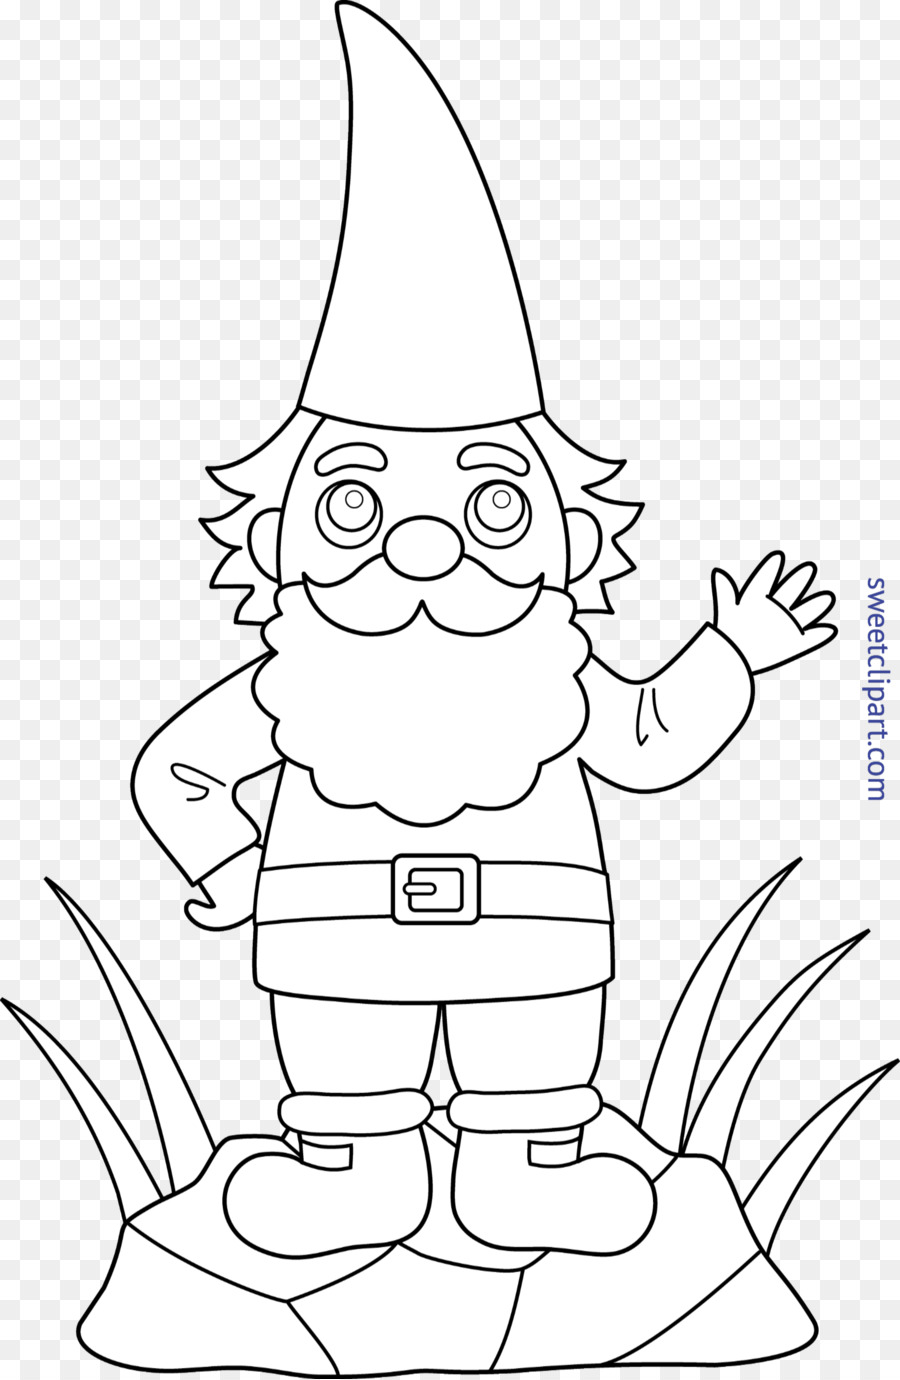 Garden gnome Flower garden Drawing Coloring book - Gnome png download - 5212*7984 - Free Transparent Garden Gnome png Download.